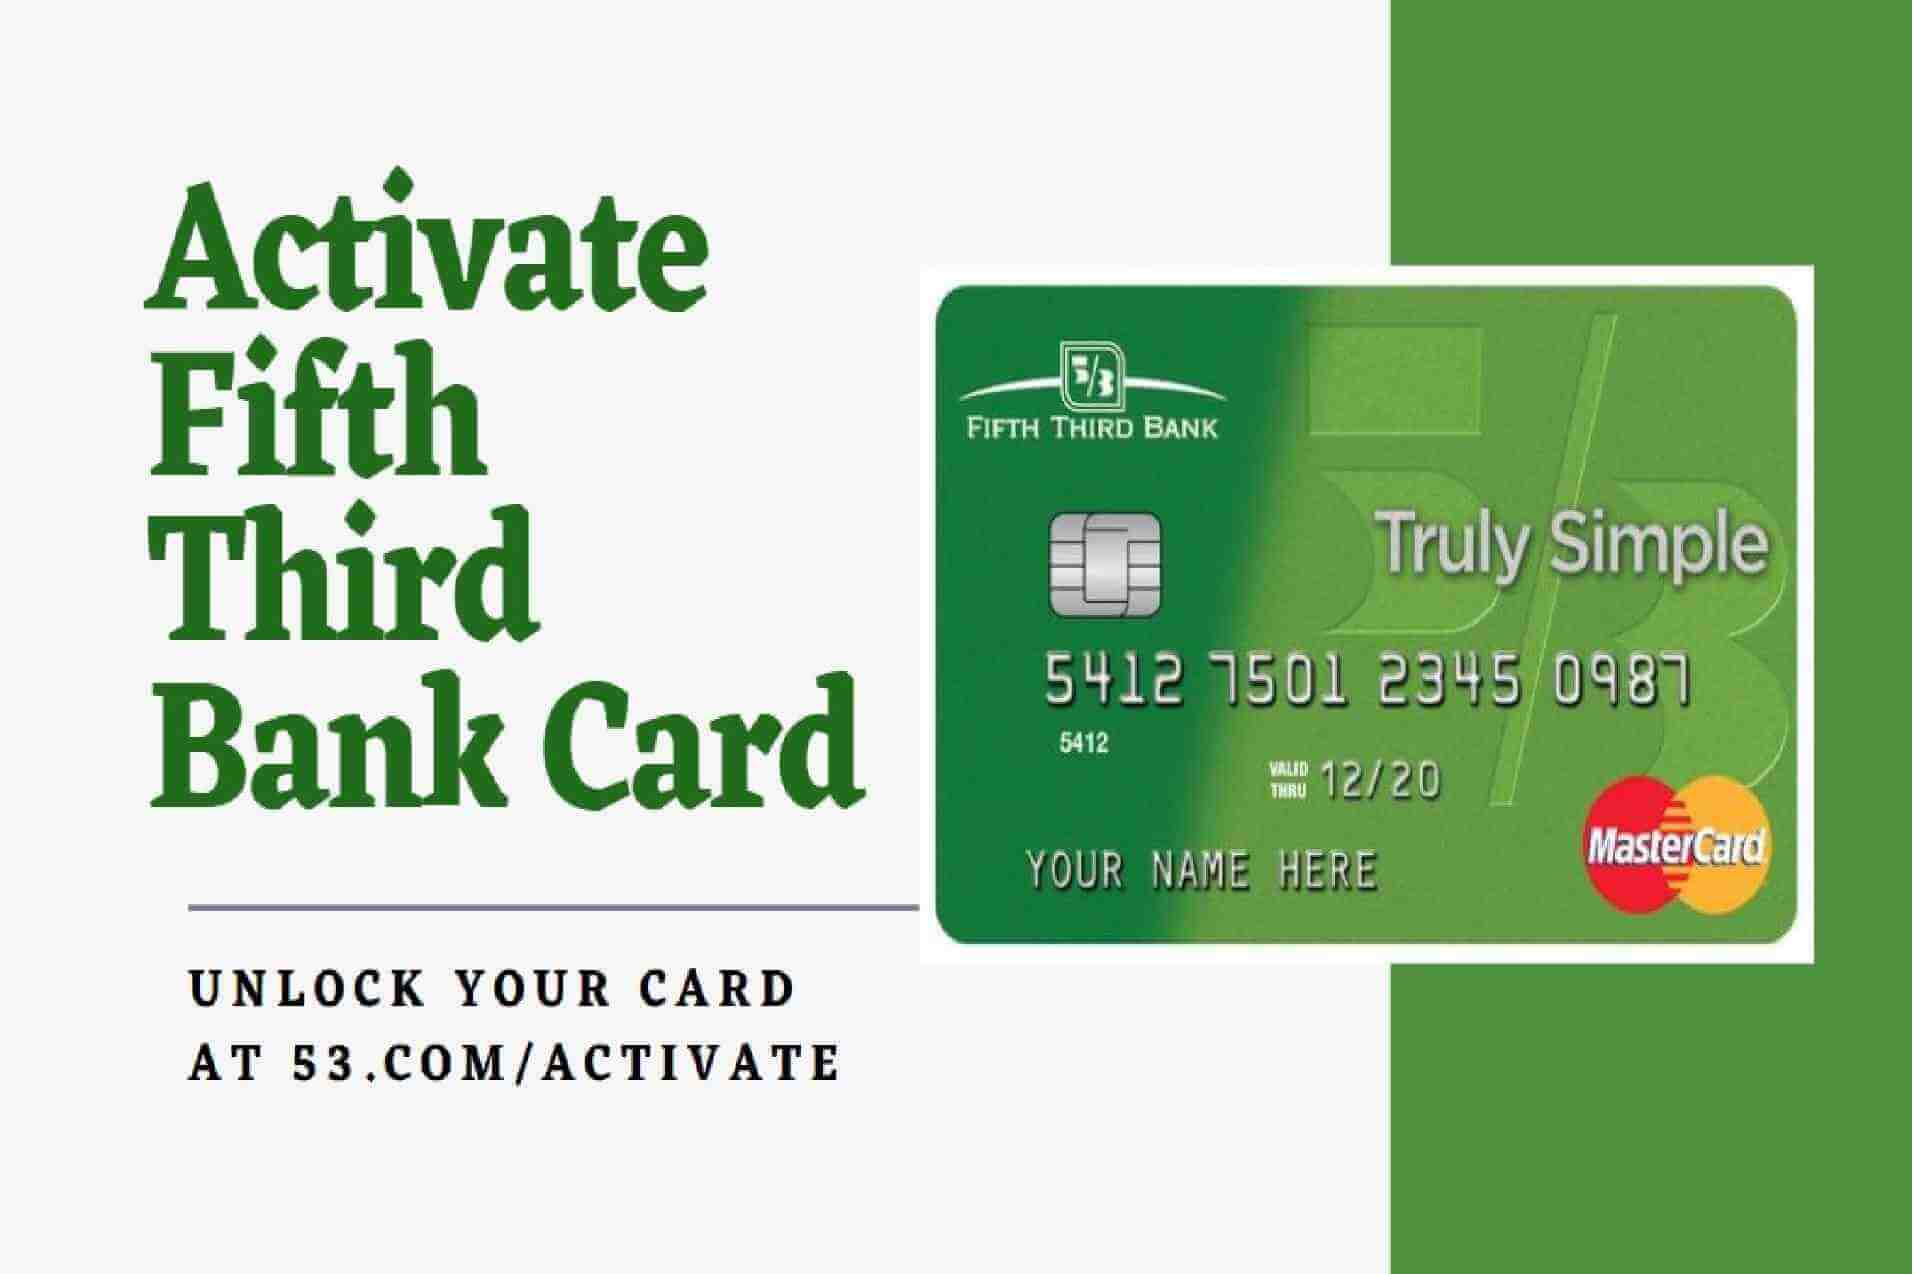 Activate fifth third card